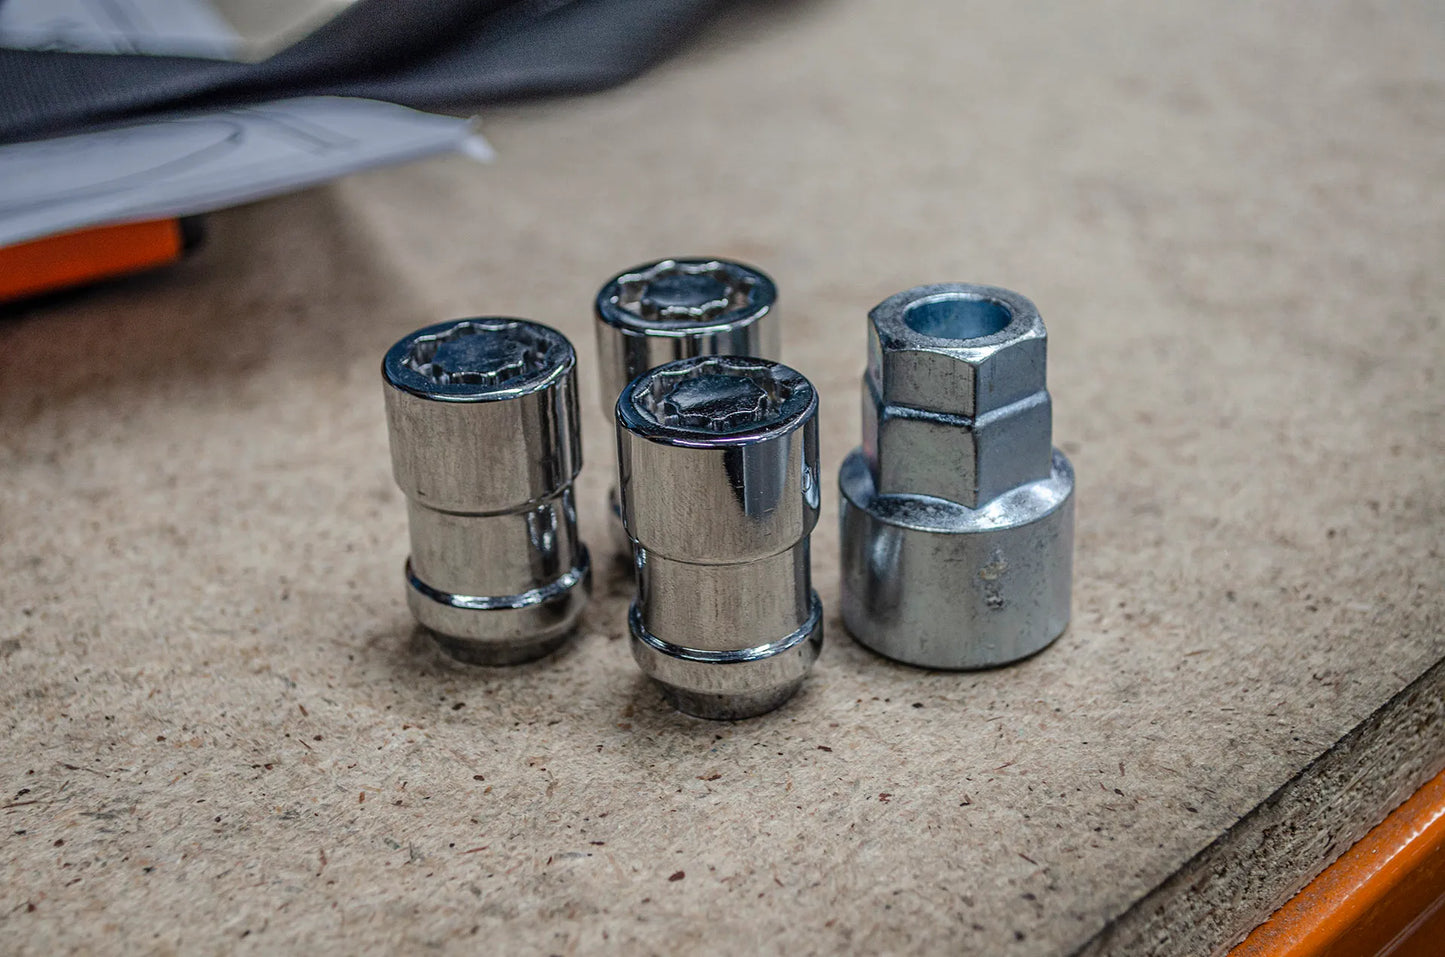 Mirack M14 wheel nuts keep your wheels secure for fearless adventures.